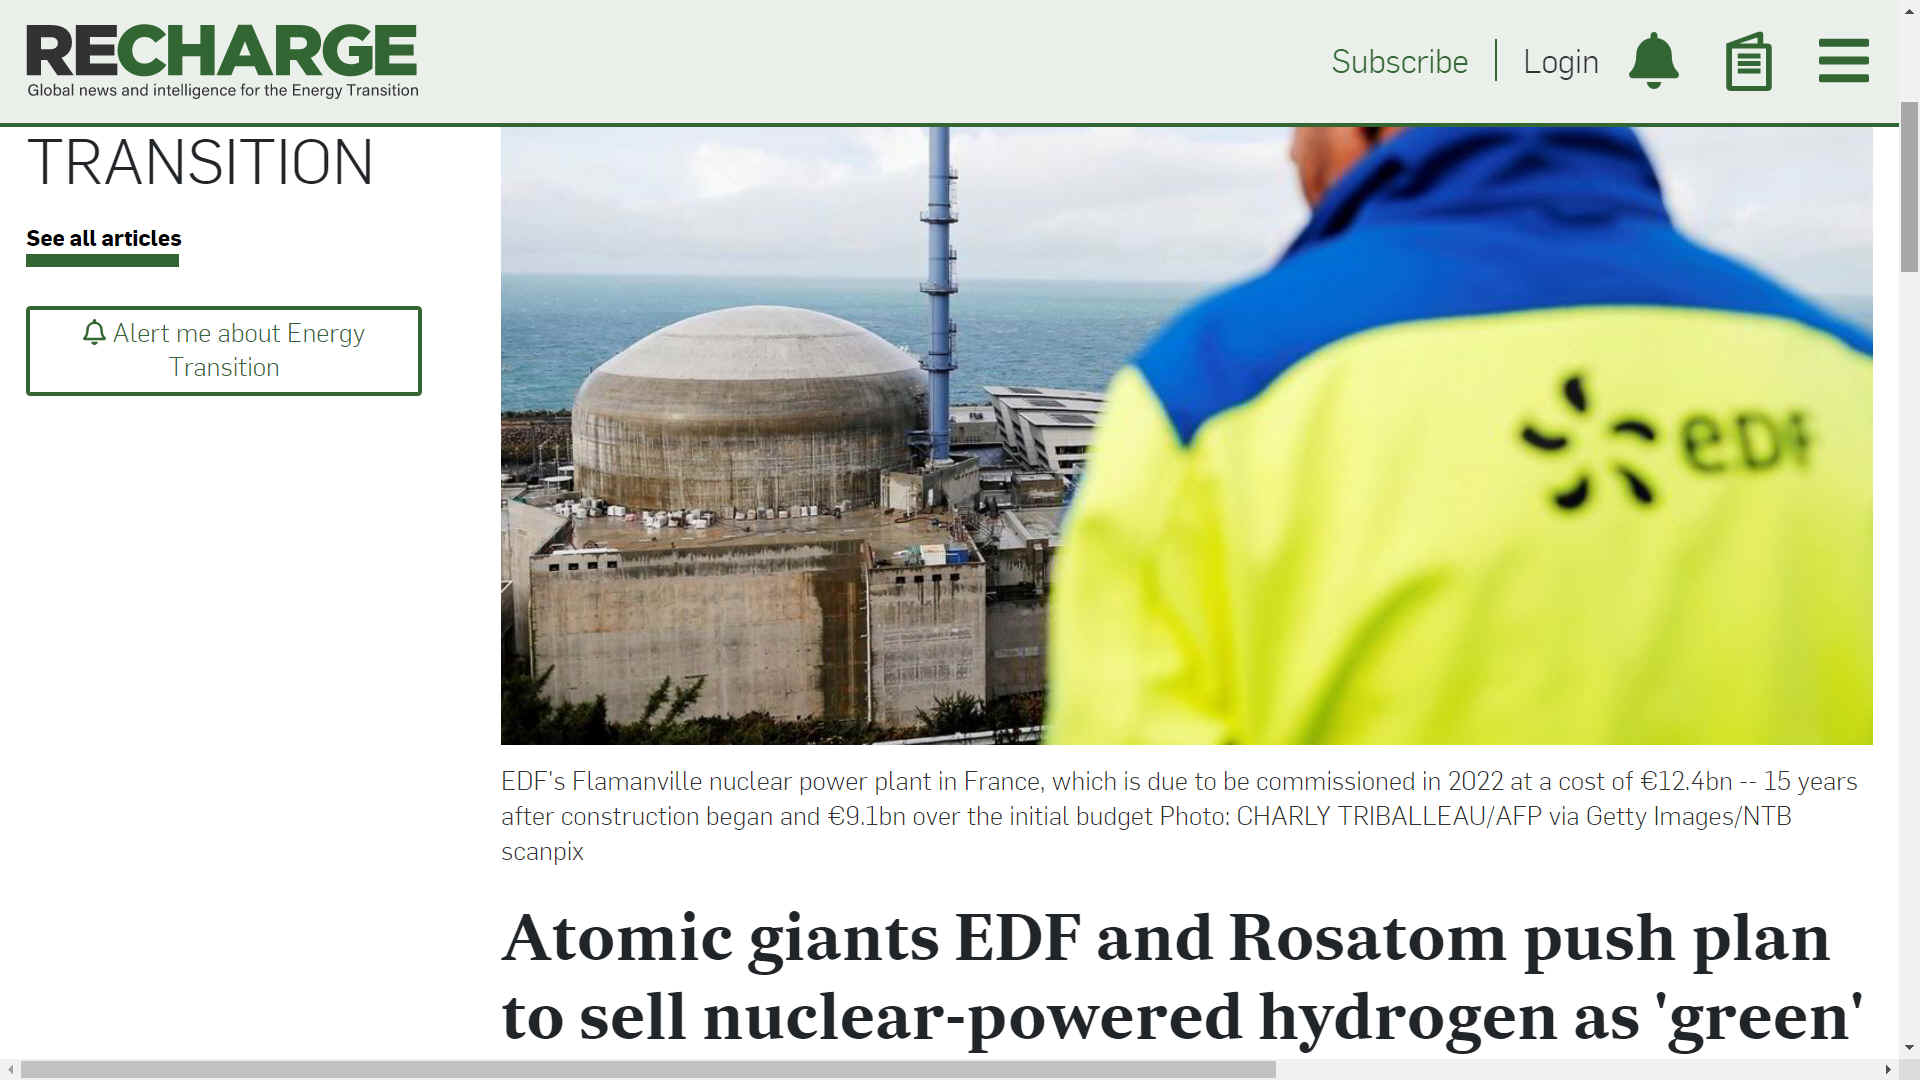 EDF's Flamanville nuclear power plant in France, Rosatom